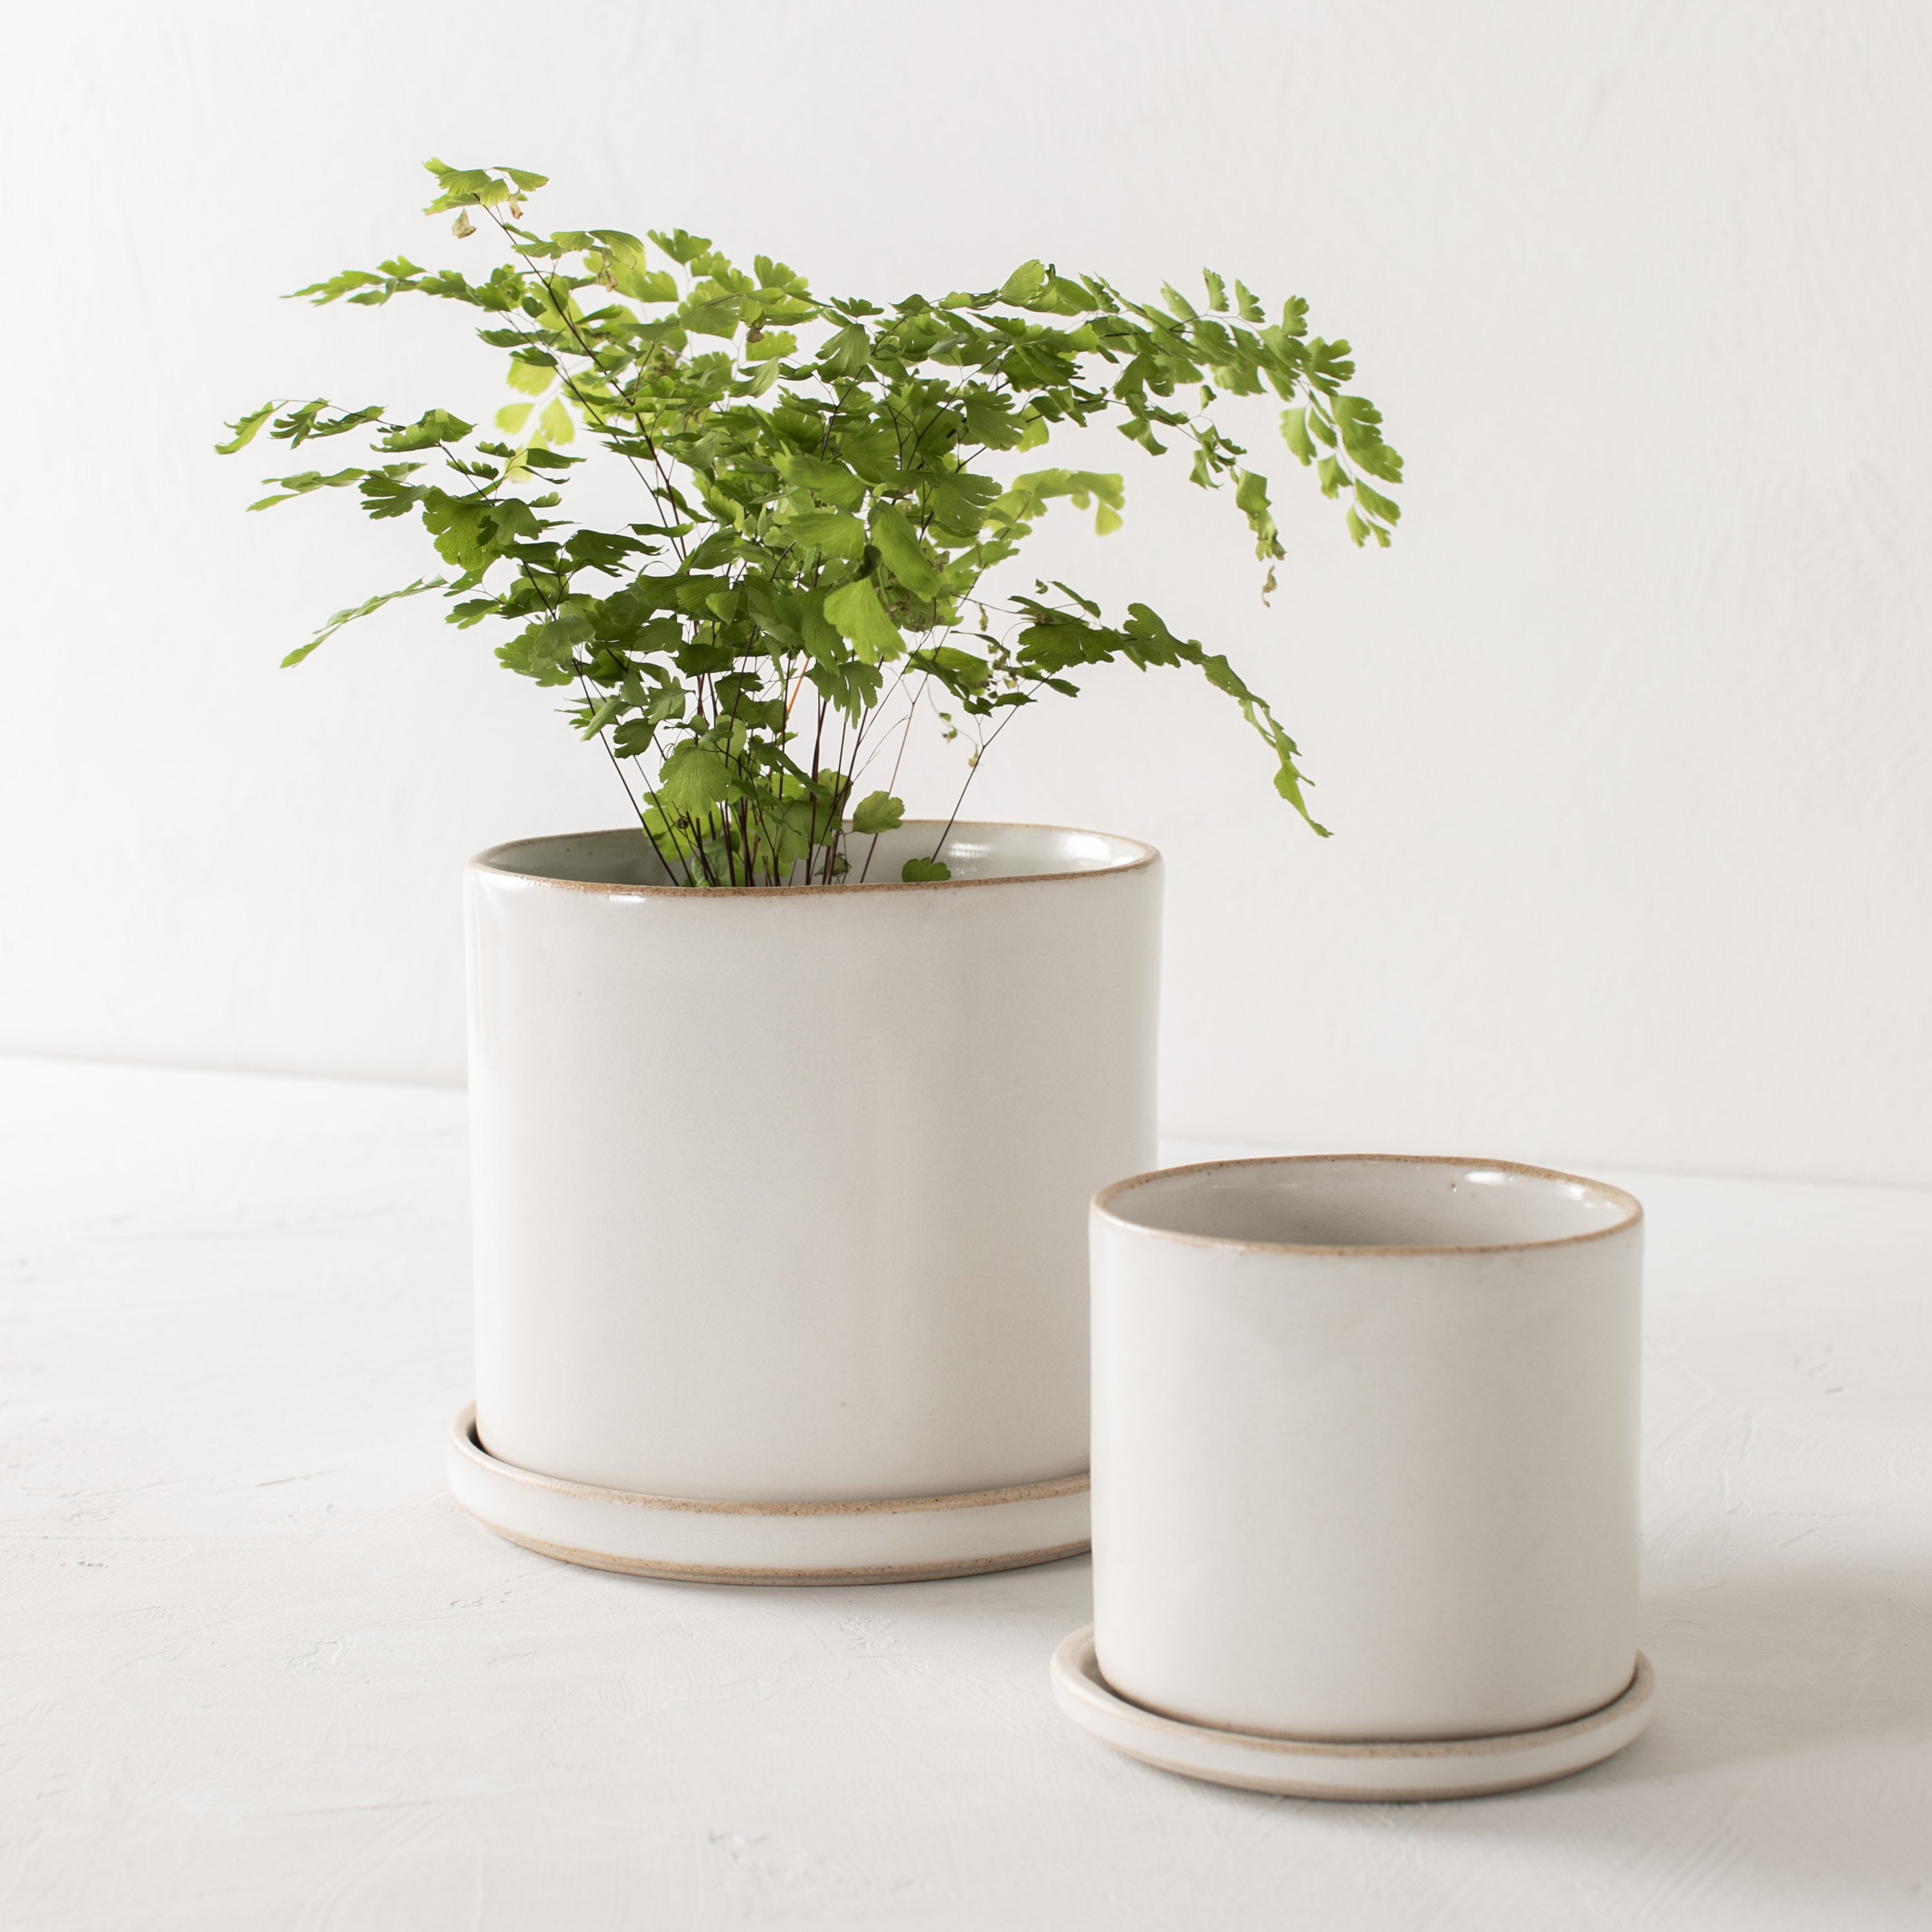 Two minimal ceramic planter close up. One larger and smaller, planters have an exposed stoneware rim and base. Larger planter has a plant inside. Handmade ceramic planter, designed and sold by Convivial Production, Kansas City ceramics.